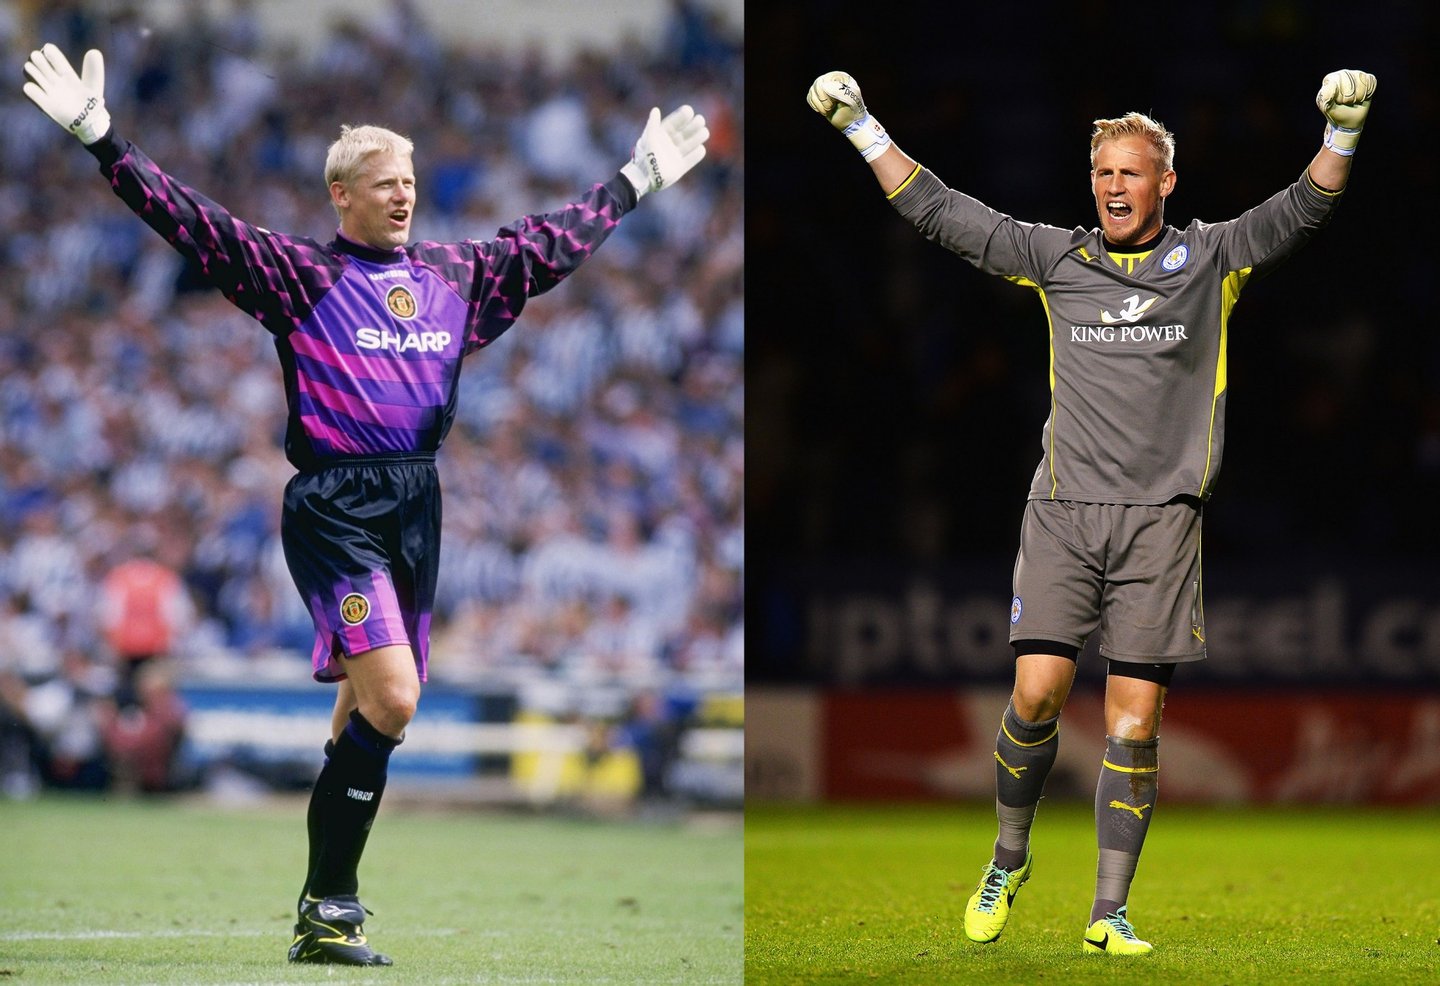 (FILE PHOTO) In this composite image a comparison has been made between images (L-R) 1251624 and 186224564 of Father (L) and Son (R). **LEFT IMAGE*** 11 Aug 1996: Peter Schmeichel of Manchester United celebrates during the FA Charity Shield between Manchester United and Newcastle United at Wembley Stadium in London. Manchester went on to defeat Newcastle by 4-0. Mandatory Credit: Shaun Botterill/Allsport UK ***RIGHT IMAGE*** LEICESTER, ENGLAND - OCTOBER 29: Goalkeeper Kasper Schmeichel of Leicester City celebrates a Leicester goal during the Capital One Cup fourth round match between Leicester City and Fulham at the King Power Stadium on October 29, 2013 in Leicester, England. (Photo by Laurence Griffiths/Getty Images)